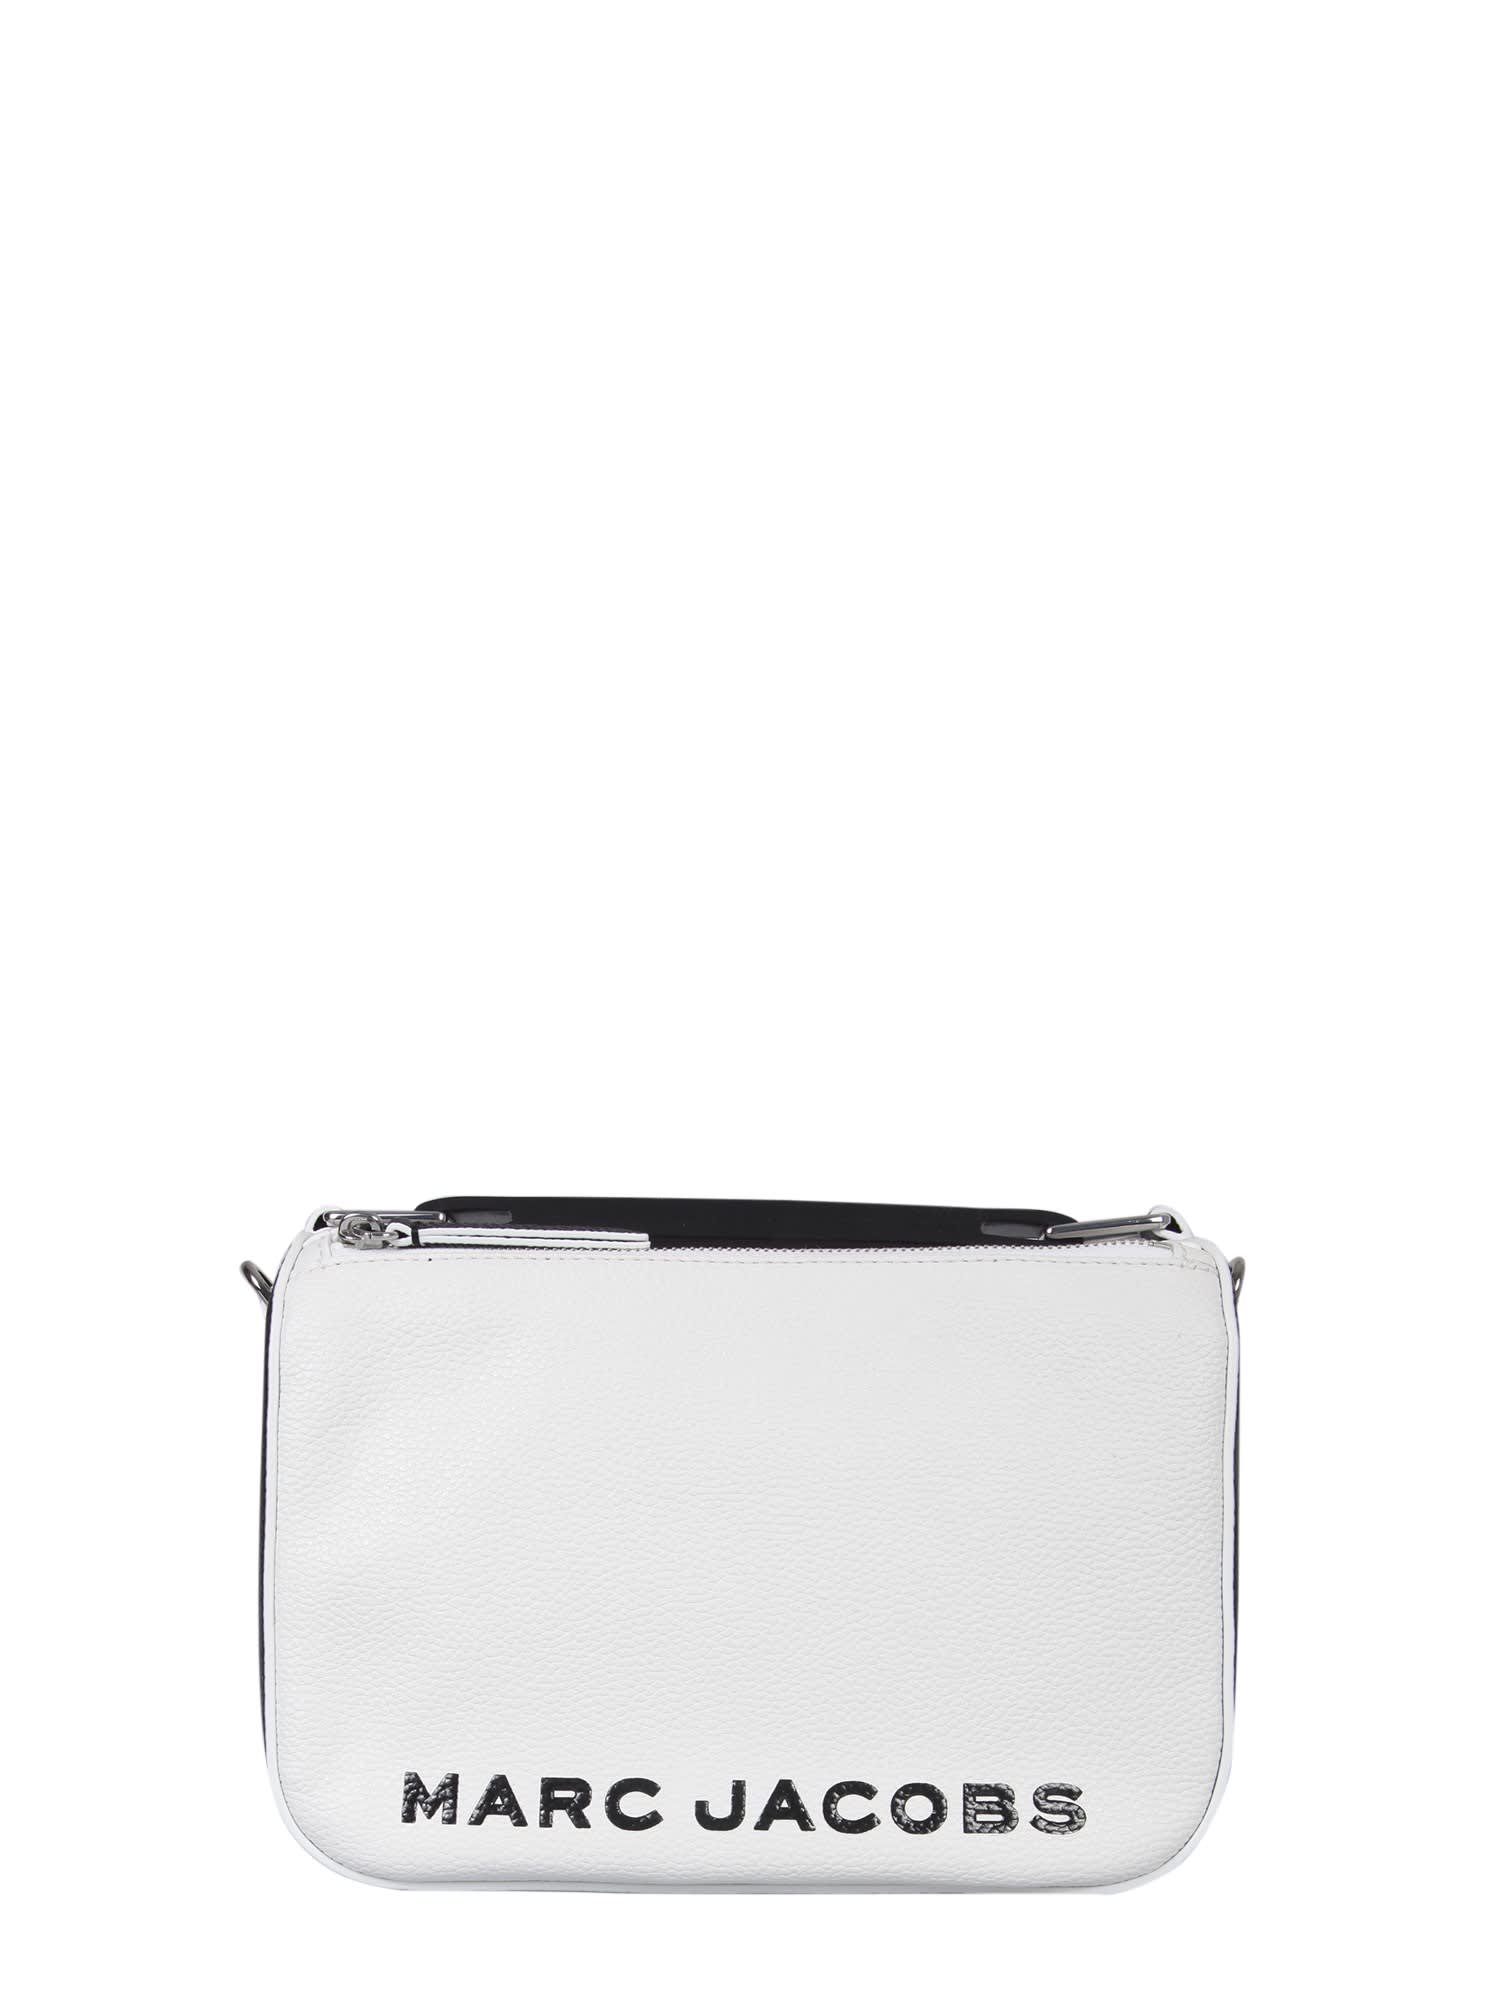 Marc Jacobs The Colorblock Softbox 23 Bag